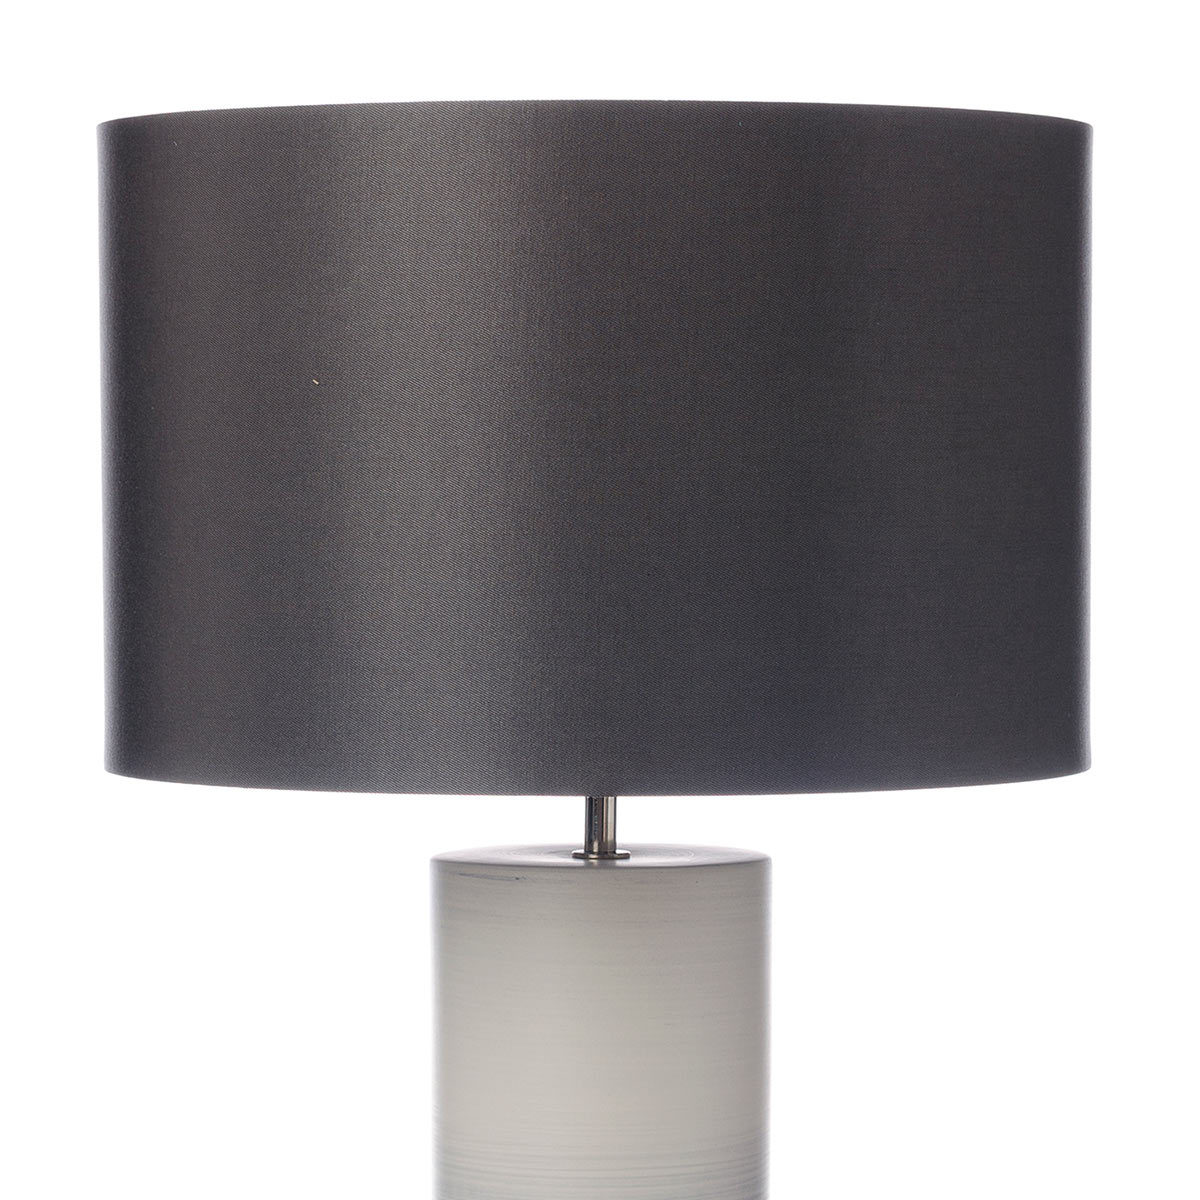 Close up Image of Dar Lighting Nazare Table Lamp Shade